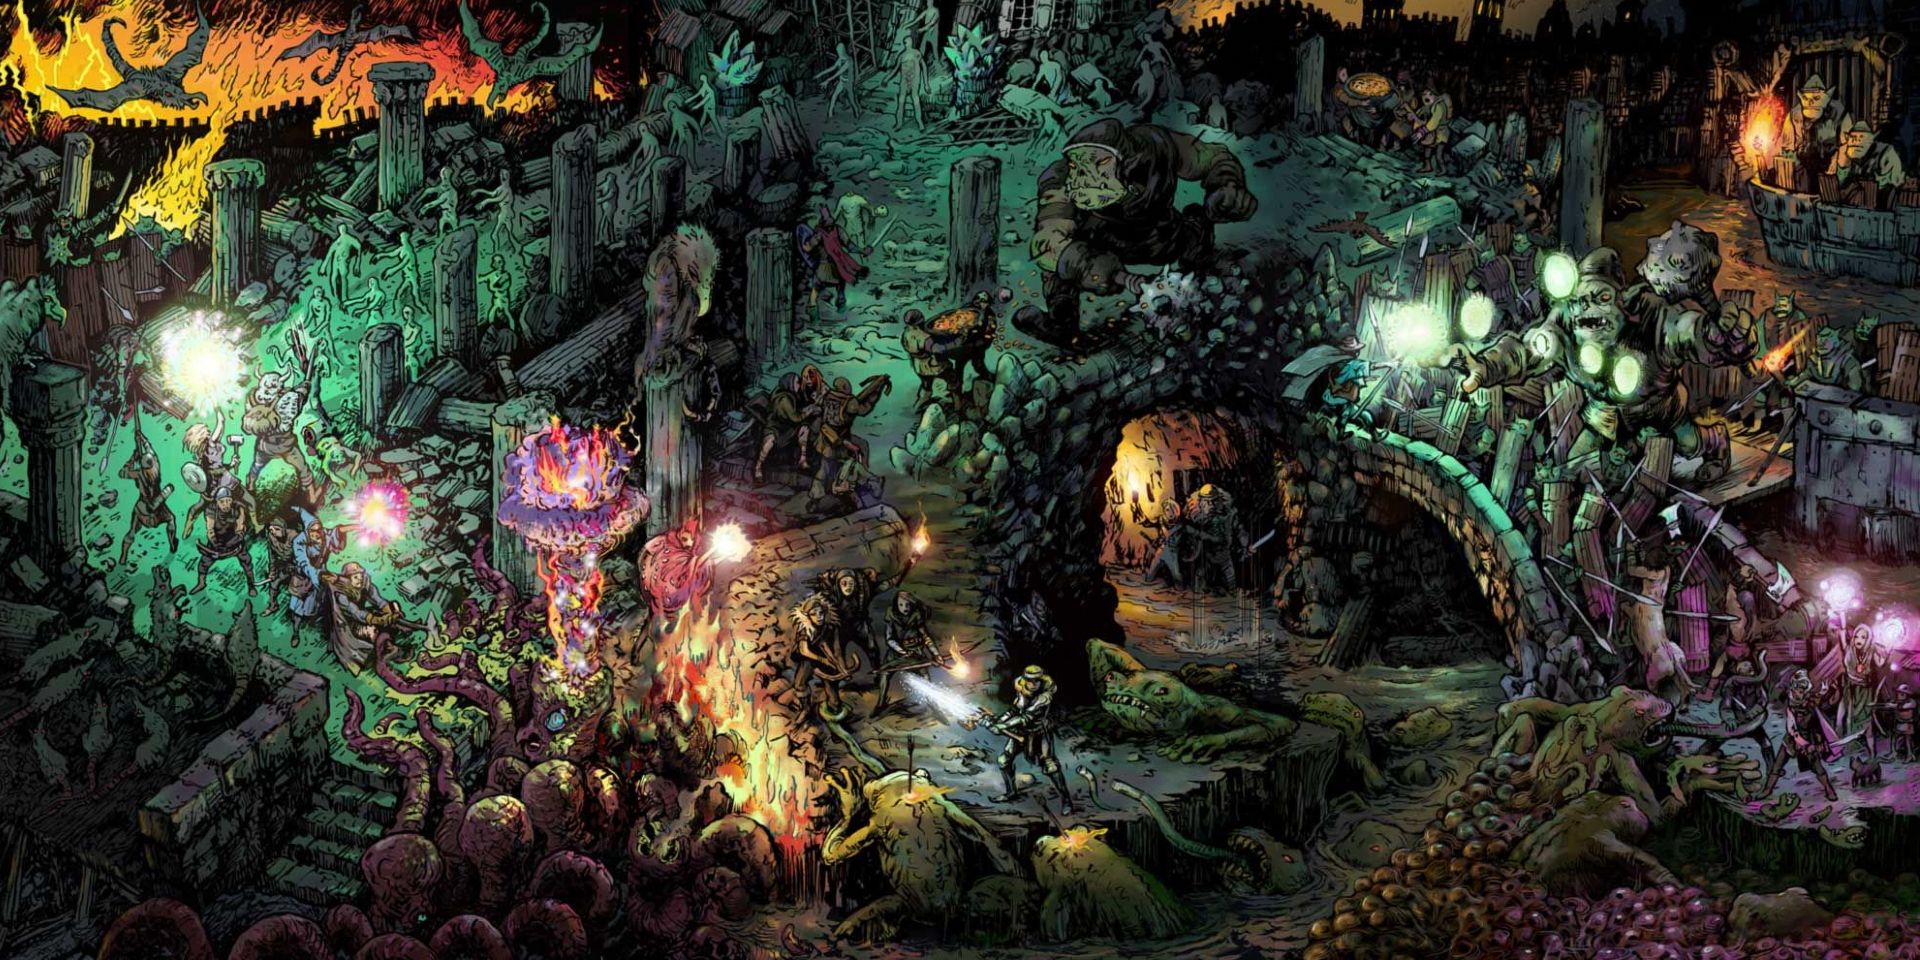 detailed colourful dungeon world picture, showing multiple environments and enemies all artfully blended together in an artistic design